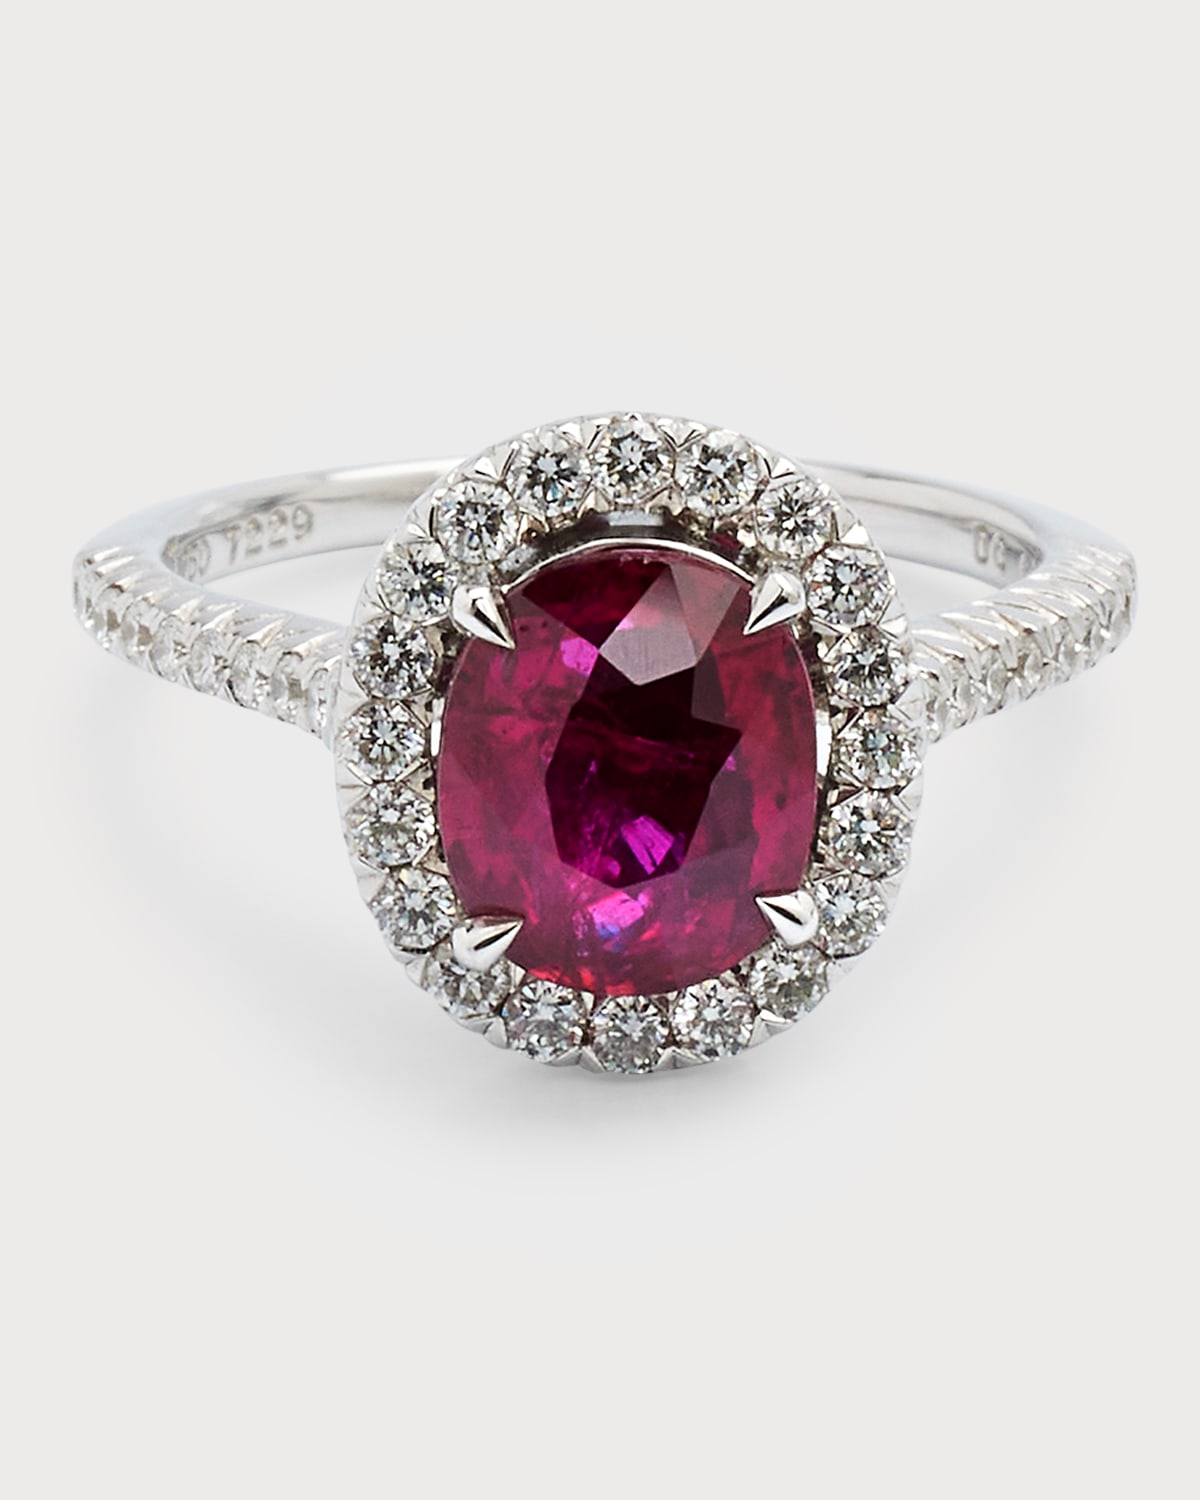 18K White Gold Diamond and Ruby Solitaire Ring, Size 6.25